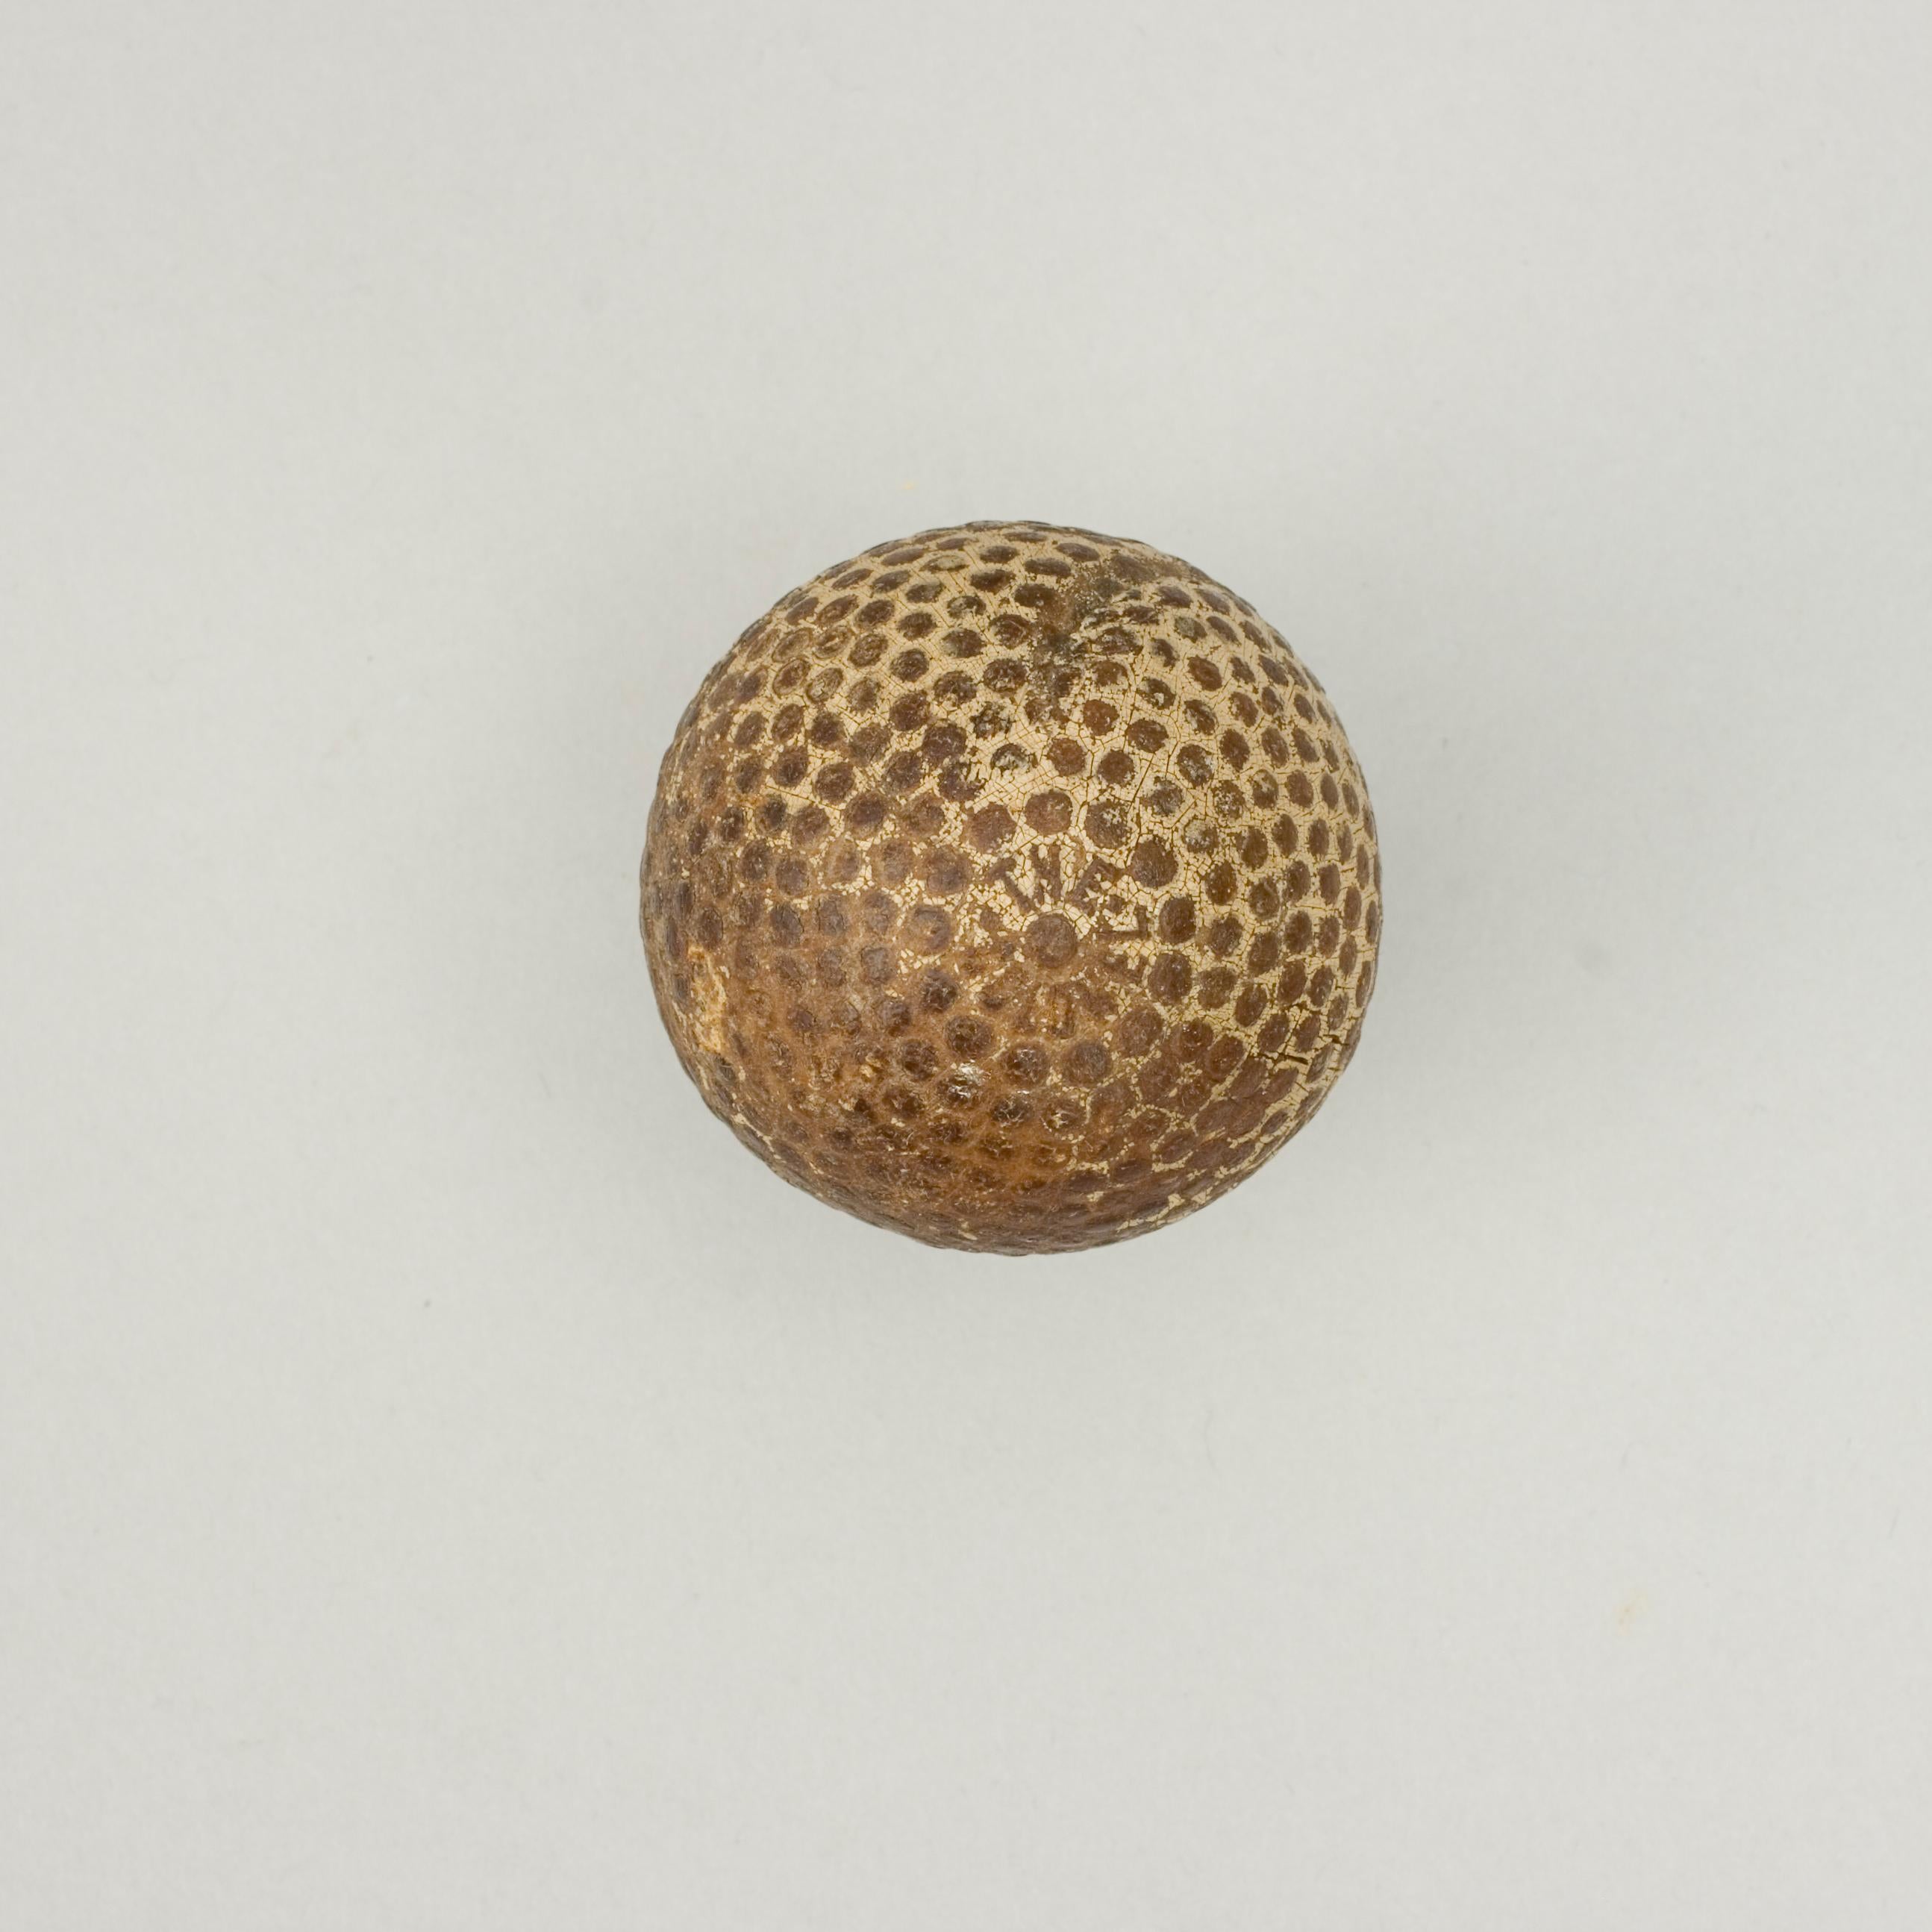 Bramble Pattern Golf Ball By St. Mungo.
A good example of 'The Colonel' bramble patterned rubber core golf ball with gutta percha cover. The golf ball is in good condition and is manufactured by St. Mungo Manufacturing Co. of America, Newark, New